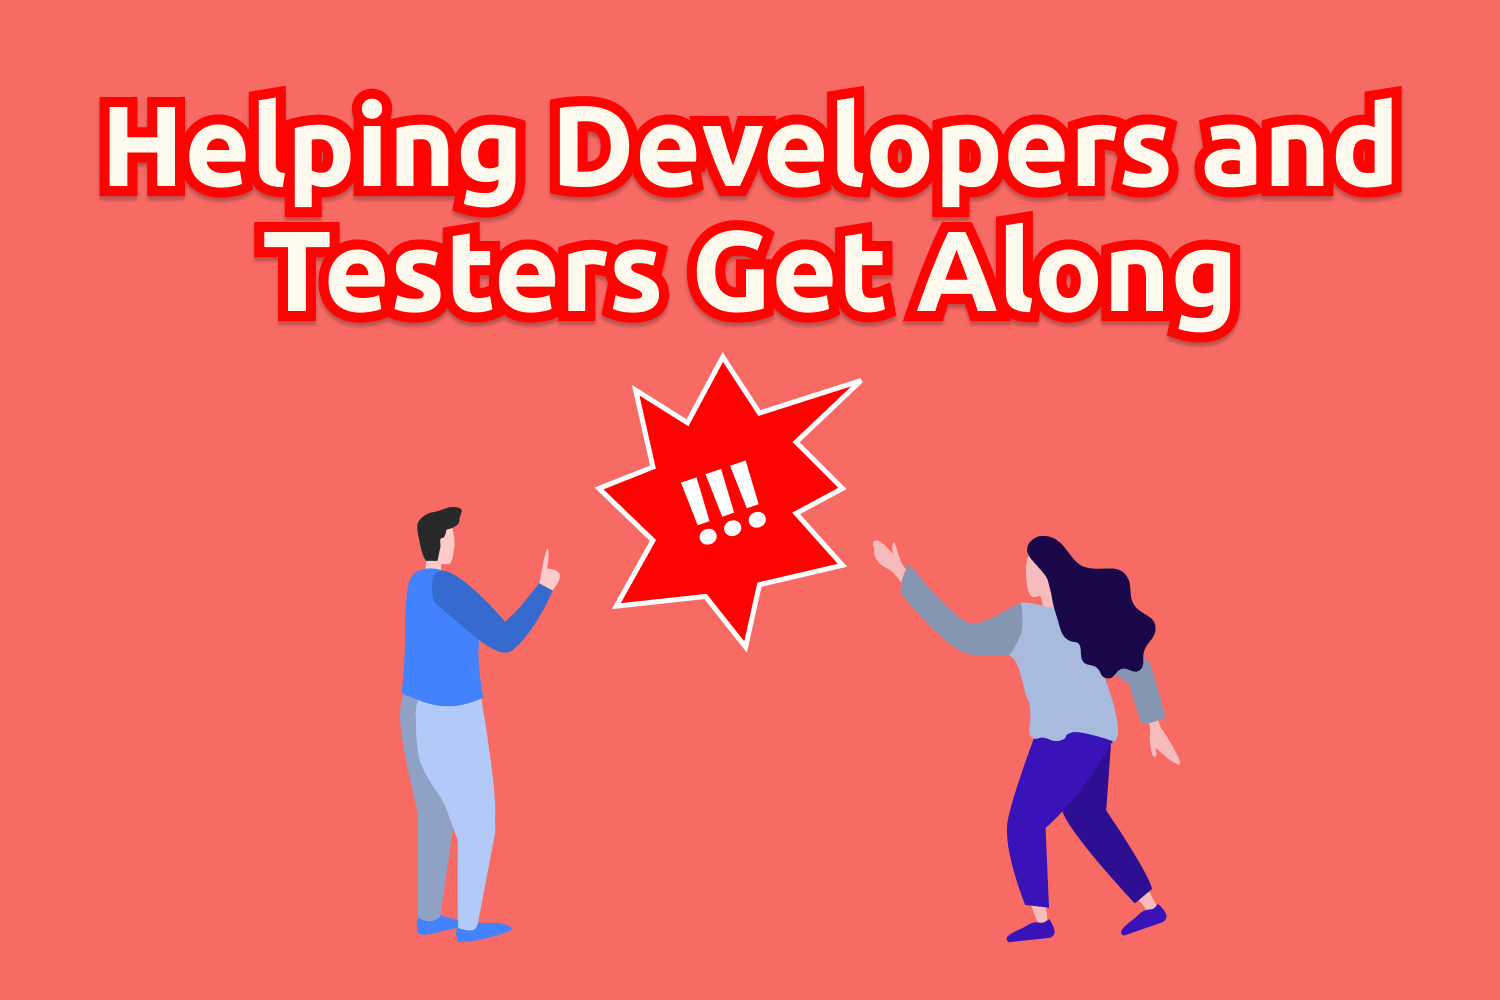 Helping Developers and Testers Get Along